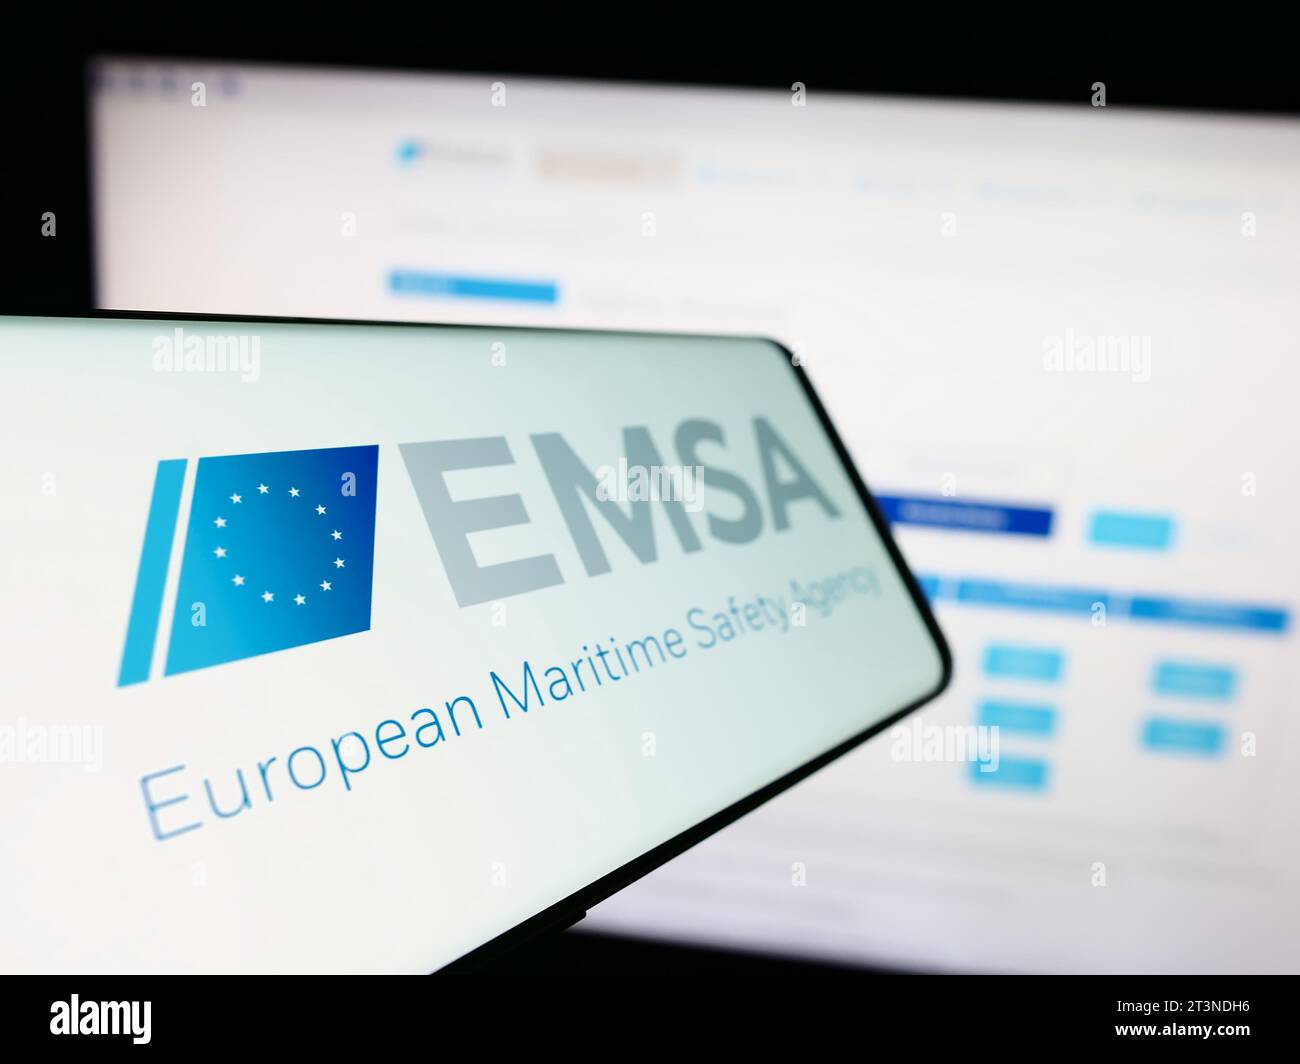 Smartphone with logo of EU institution European Maritime Safety Agency (EMSA) in front of website. Focus on center-left of phone display. Stock Photo